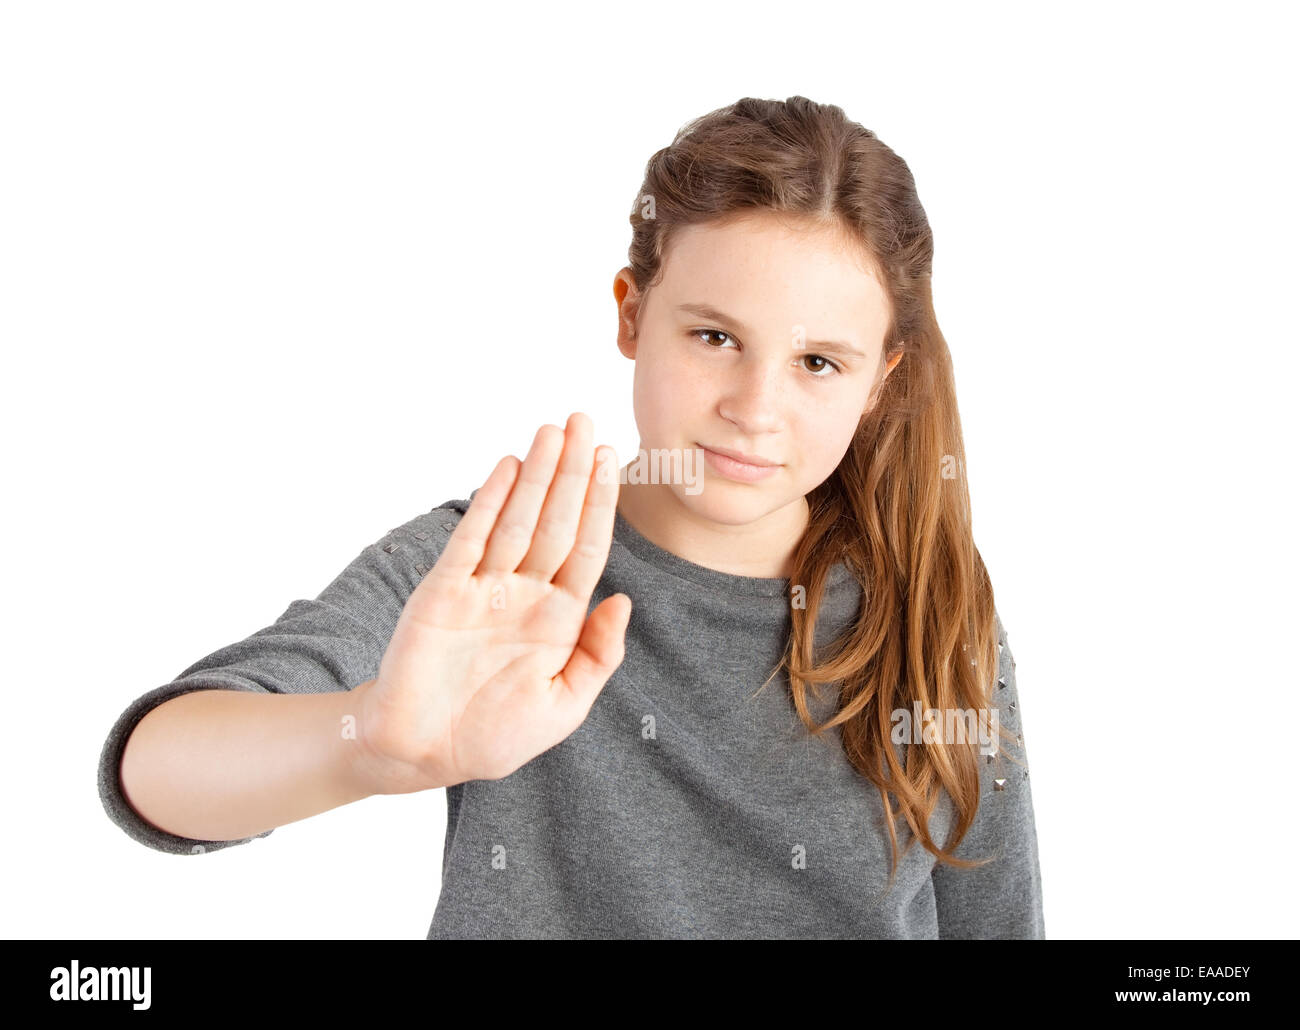 young girl making stop gesture on white background Stock Photo